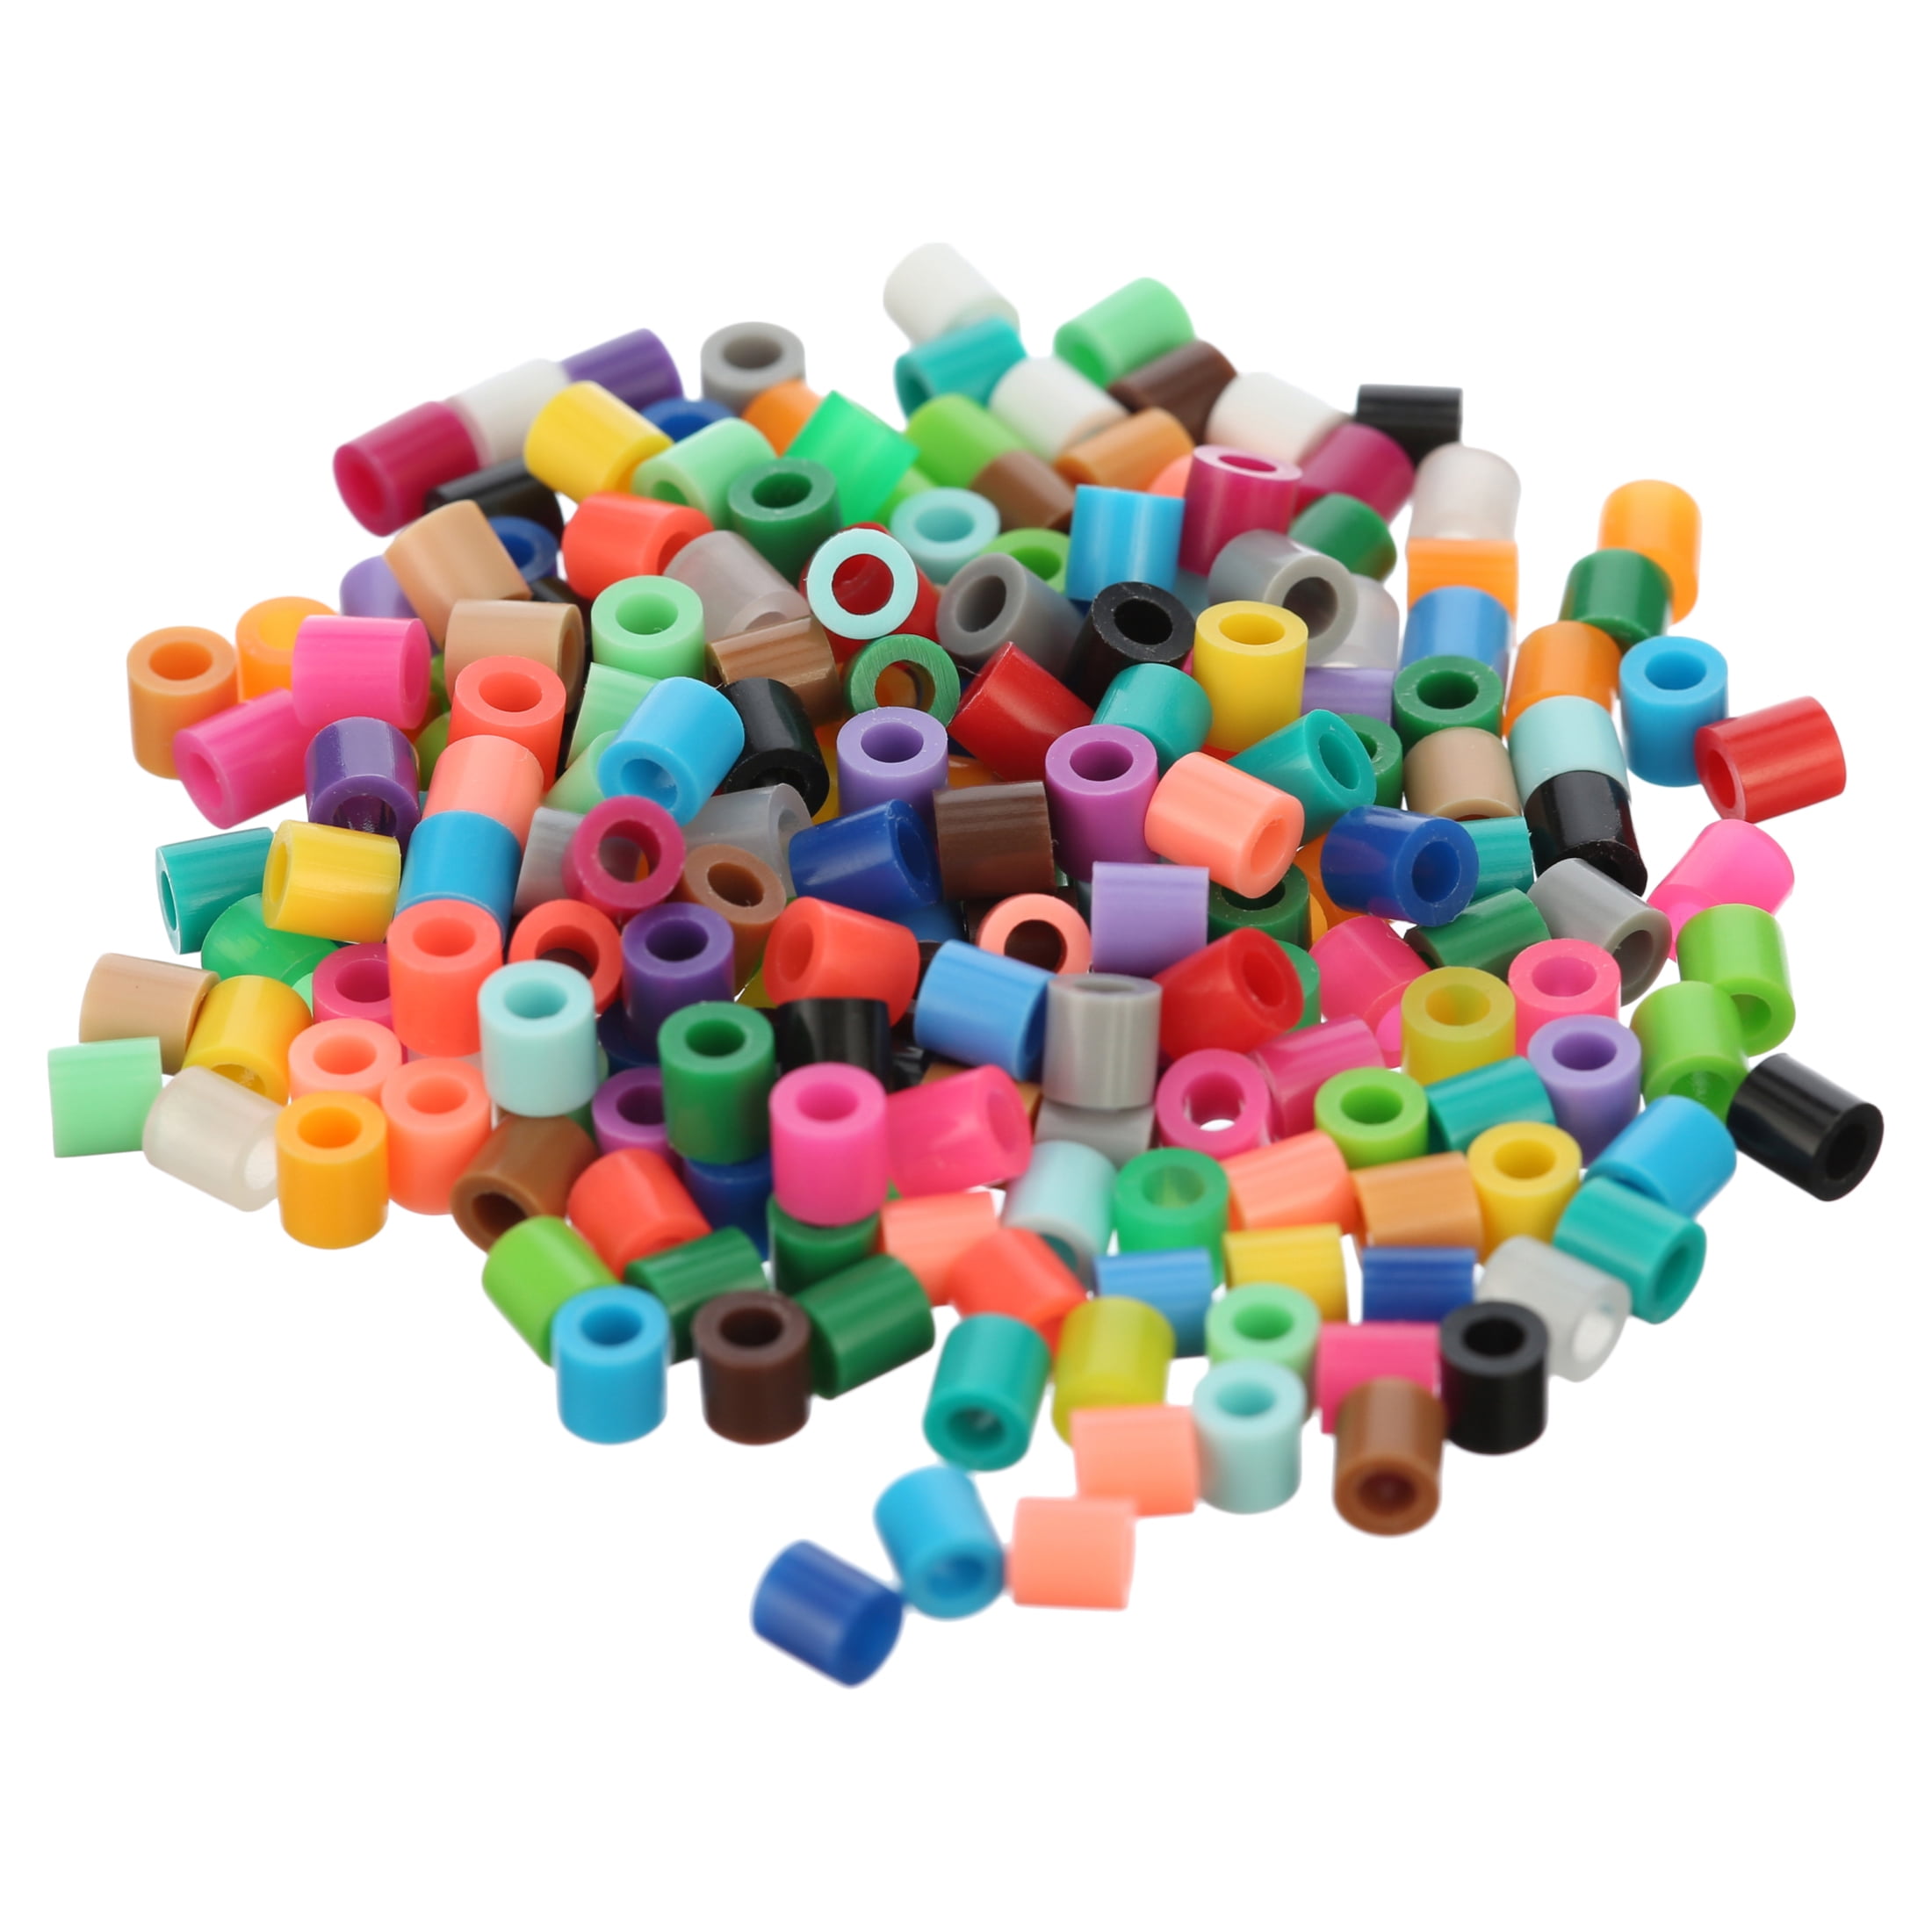 22,000 Fuse Beads 5mm with 100 Full Size Patterns, 20 Pre-Sorted Colors, 4 Big Pegboards, Perler Hama Melty Iron Beads Compatible